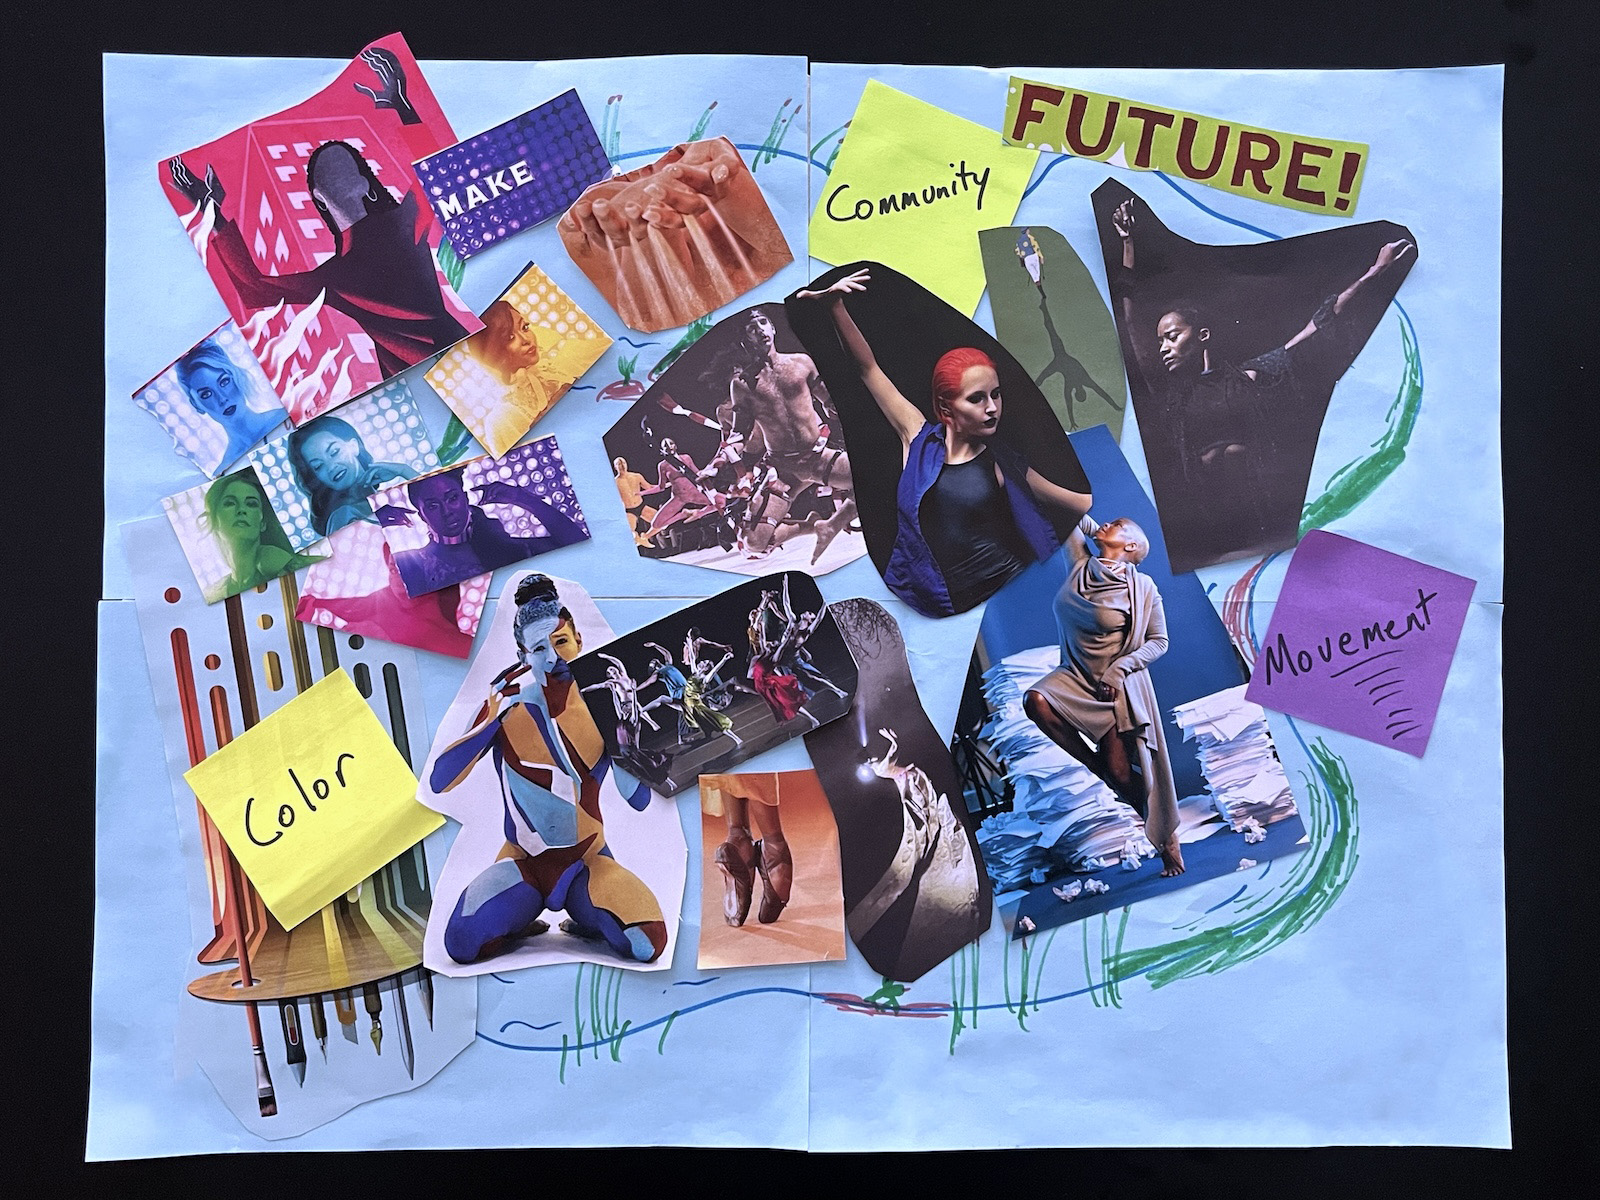 A photo of Alberto's finished pondering pond: a collage of magazine cutouts of different dancers in colorful costumes, alongside post-its and cutout words reading "color, community, movement and future!"